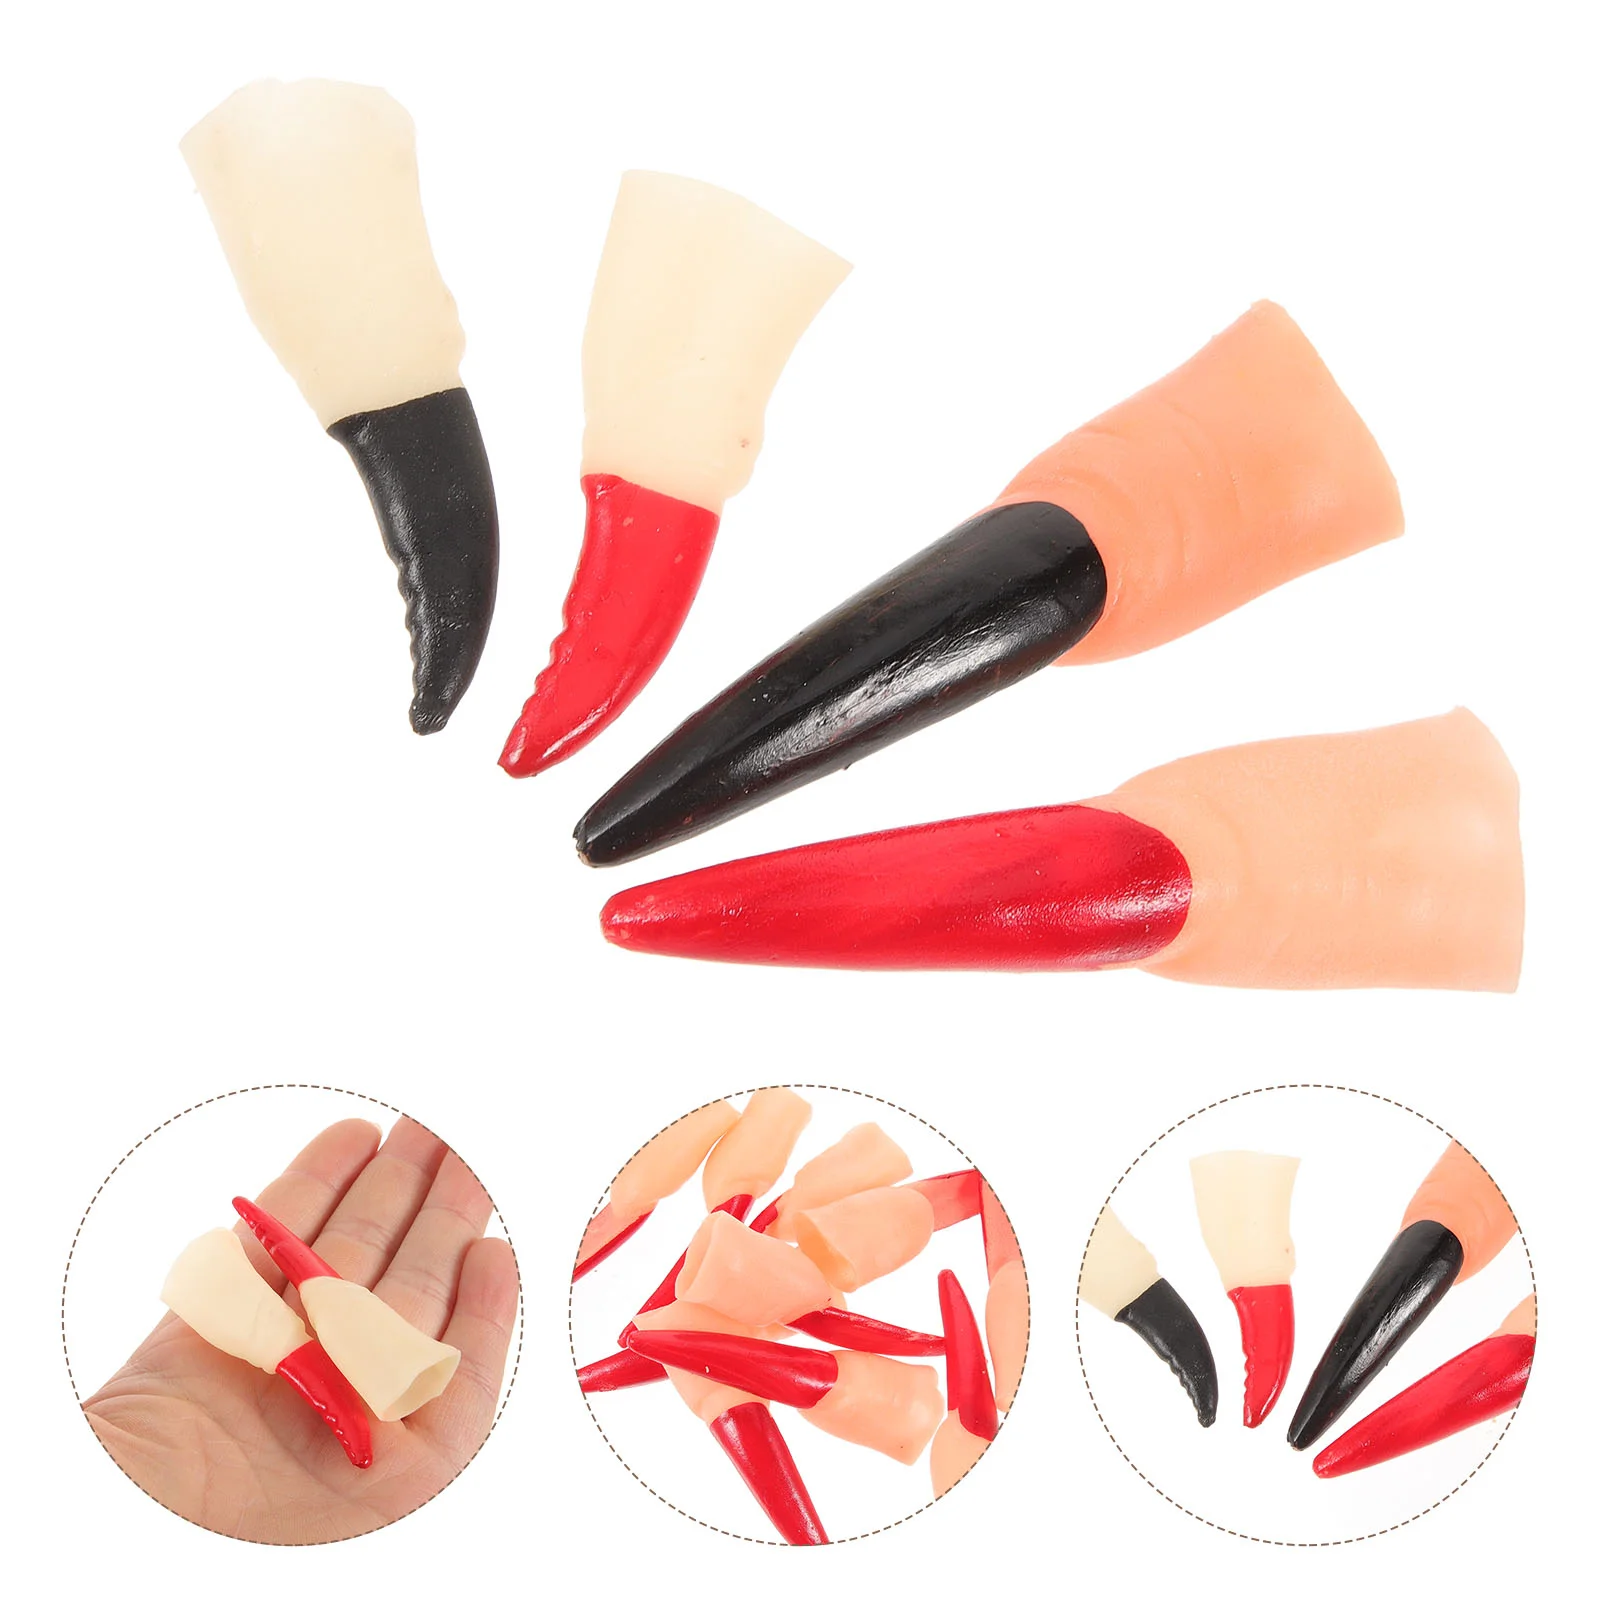 

40pcs Witch Fingers Fake Fingers Witch Cosplay Fingers Halloween Party Prank Fingers